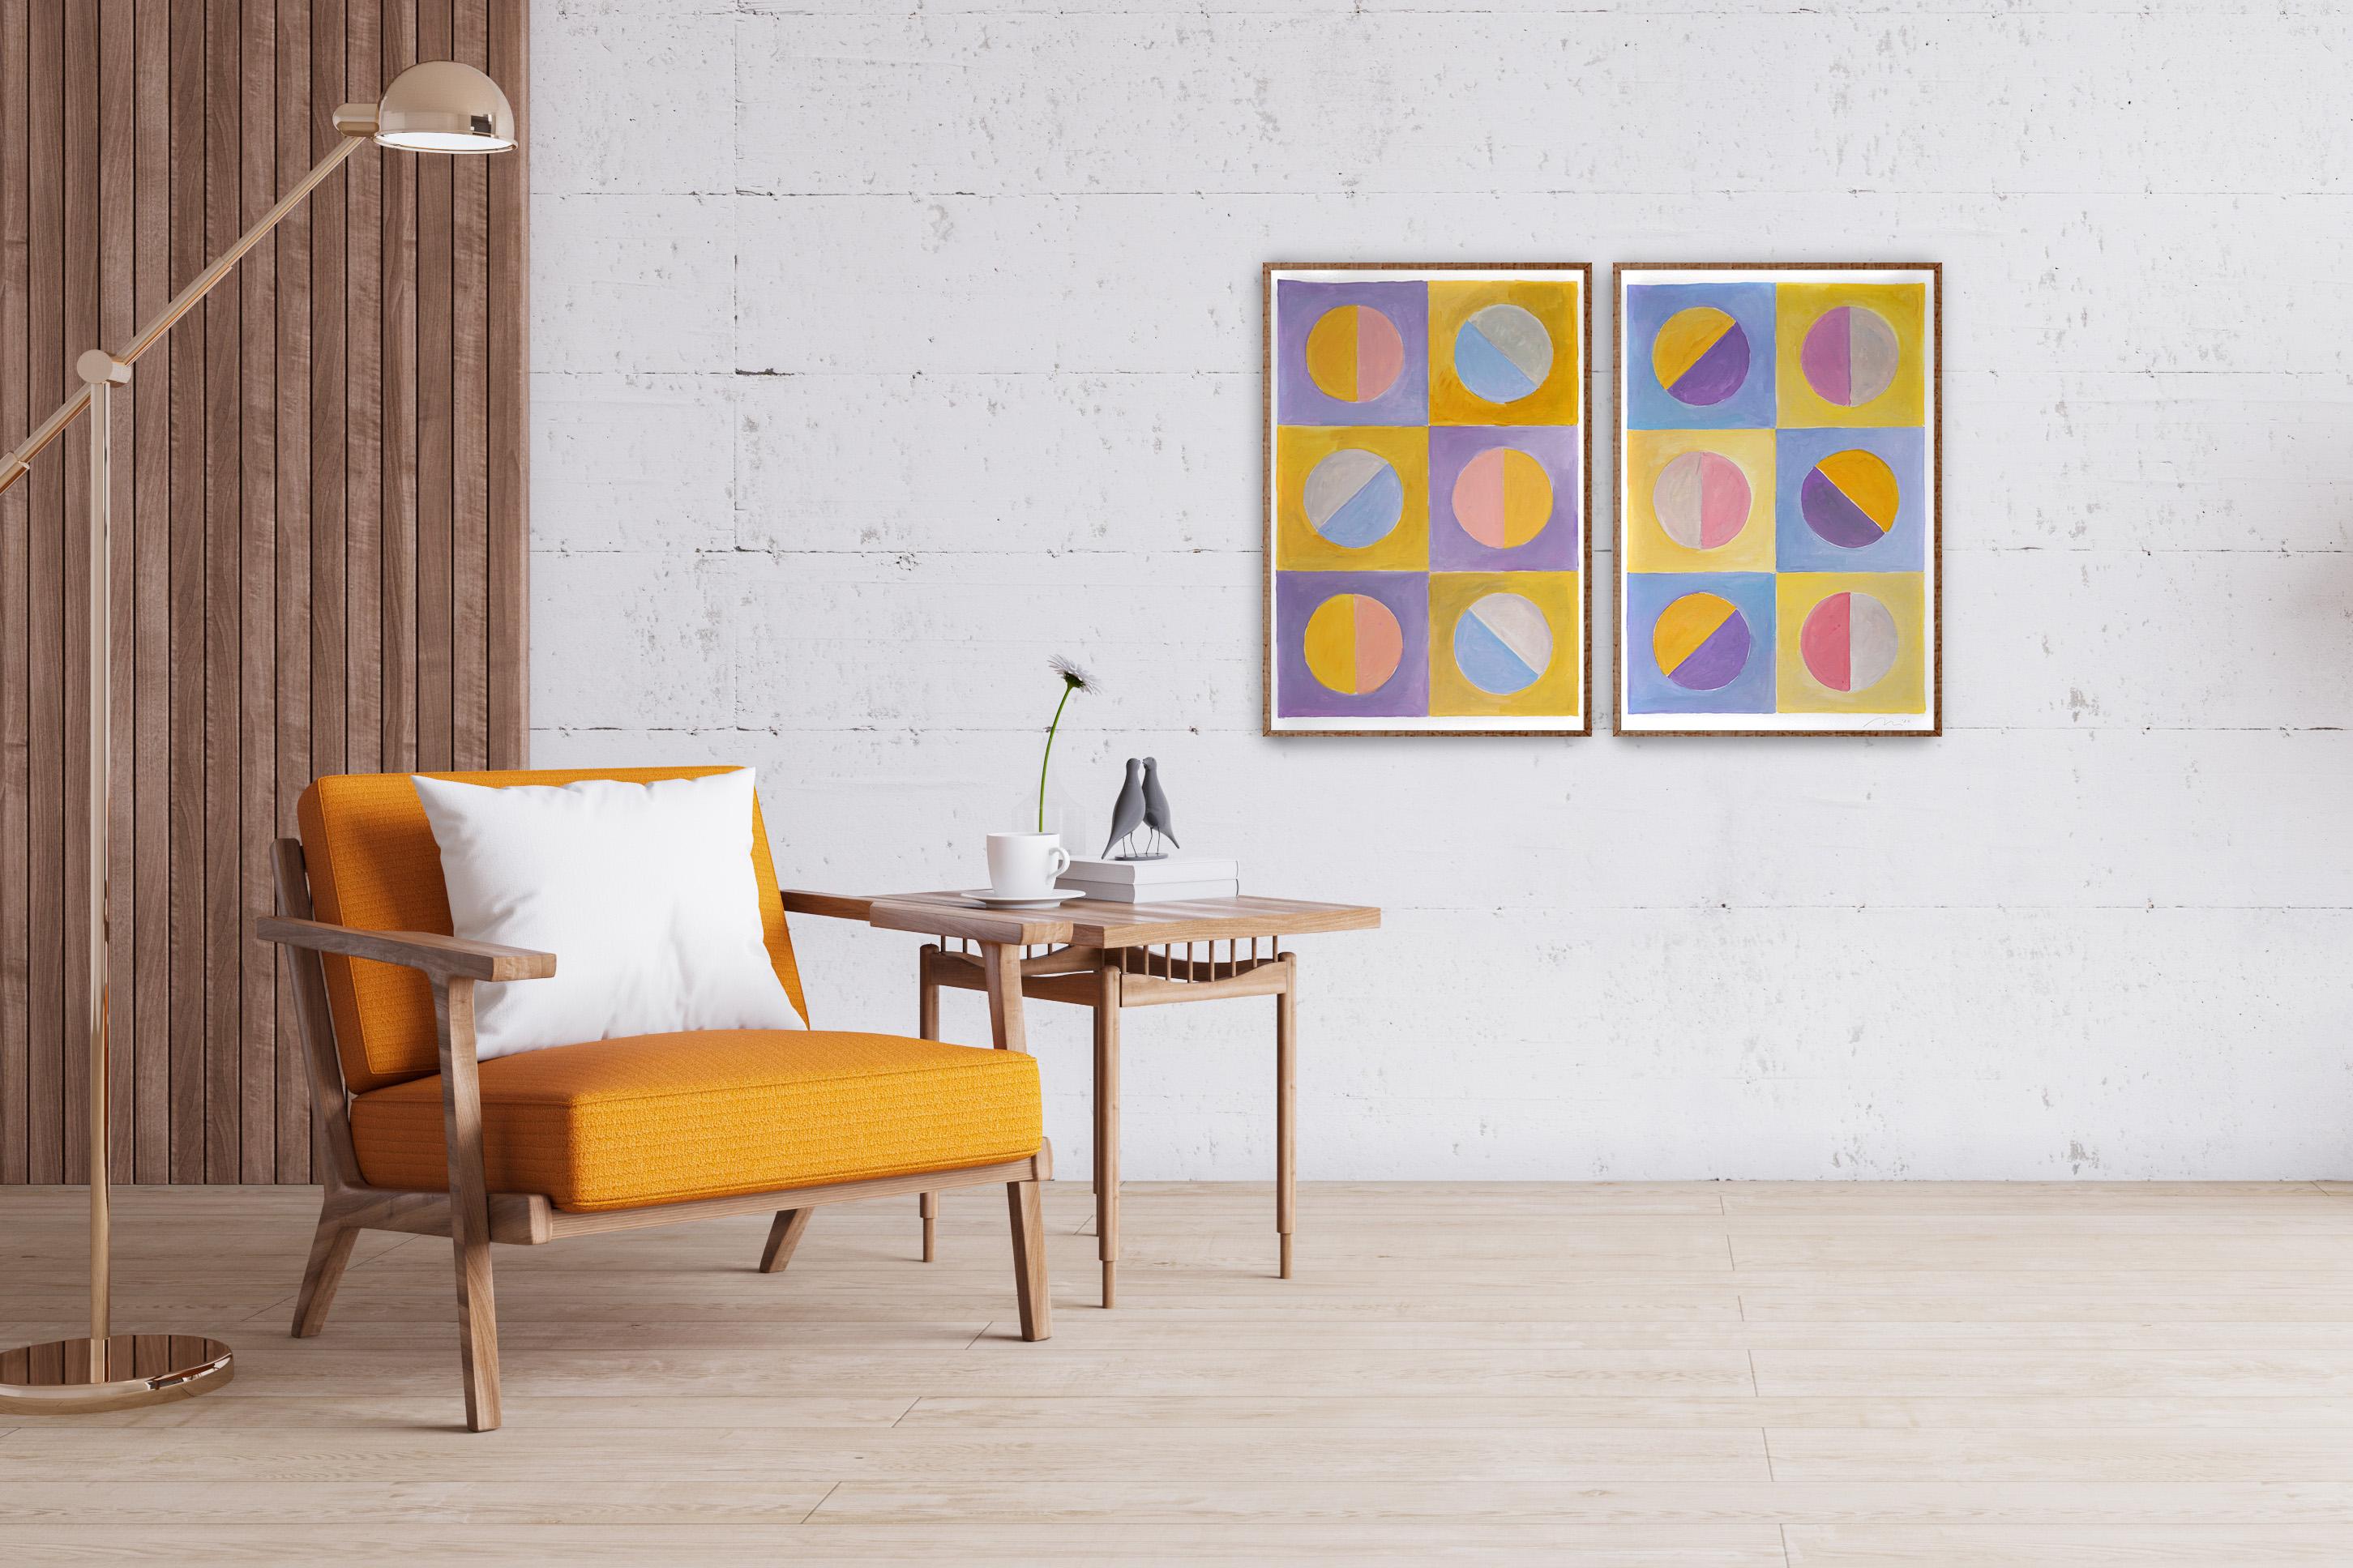 Surreal Pastel Dream, Cream and Pink, Bauhaus Geometry Diptych, Tiles Pattern - Painting by Natalia Roman